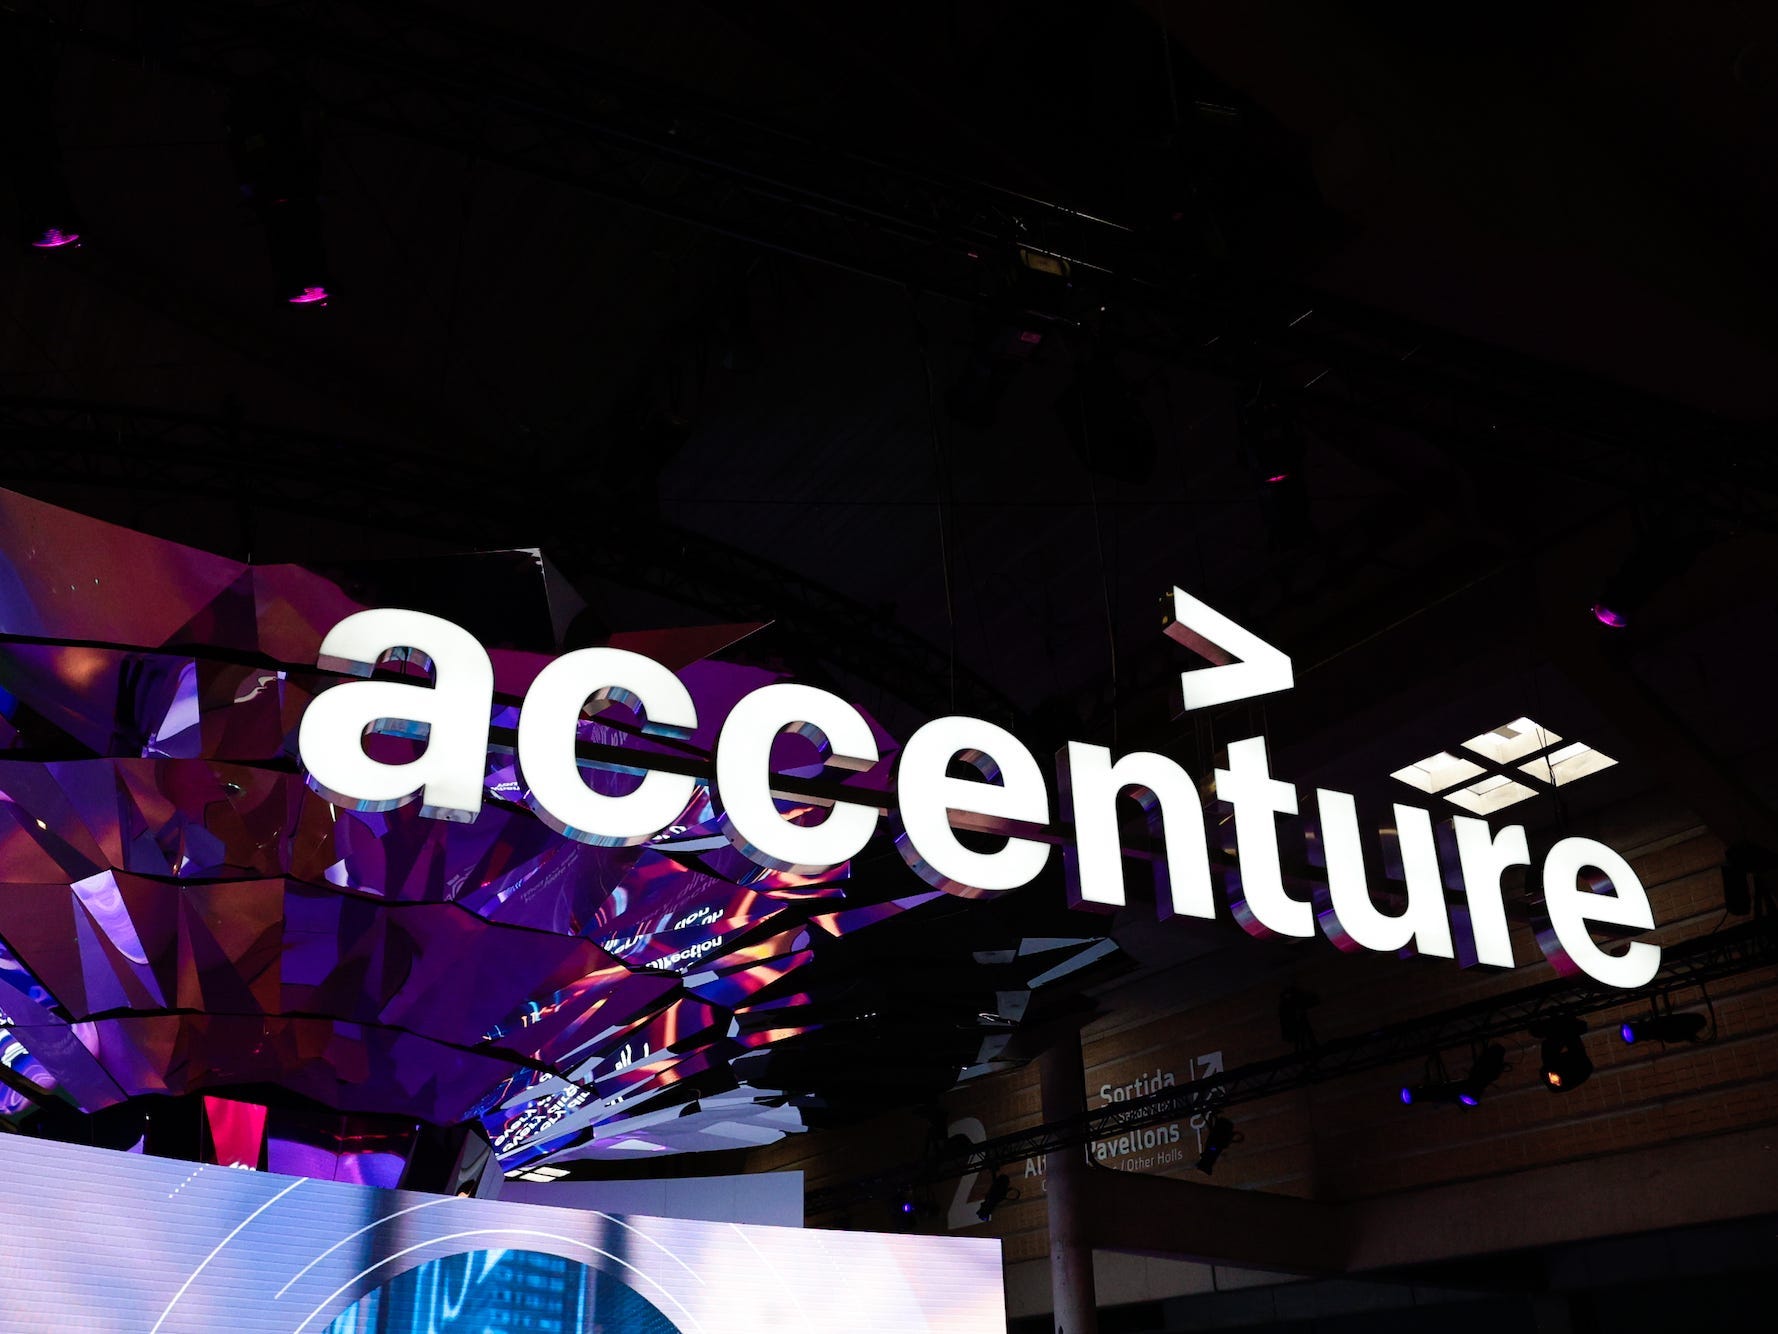 <p>Accenture is slashing 19,000 roles, or 2.5% of its total workforce, according to a <a href="https://otp.tools.investis.com/clients/us/accenture2/SEC/sec-show.aspx?Cik=0001467373&FilingId=16509145&Type=PDF&hasPdf=1" rel="noopener">Security and Exchange Commission filing</a> on March 23.</p><p>The tech consultancy company said the layoffs will take place over the next 18 months and half of the cuts will impact staffers in "non-billable corporate functions," per the filing.  </p><p>"While we continue to hire, especially to support our strategic growth priorities, during the second quarter of fiscal 2023, we initiated actions to streamline our operations and transform our non-billable corporate functions to reduce costs," Accenture wrote in the filing. </p>